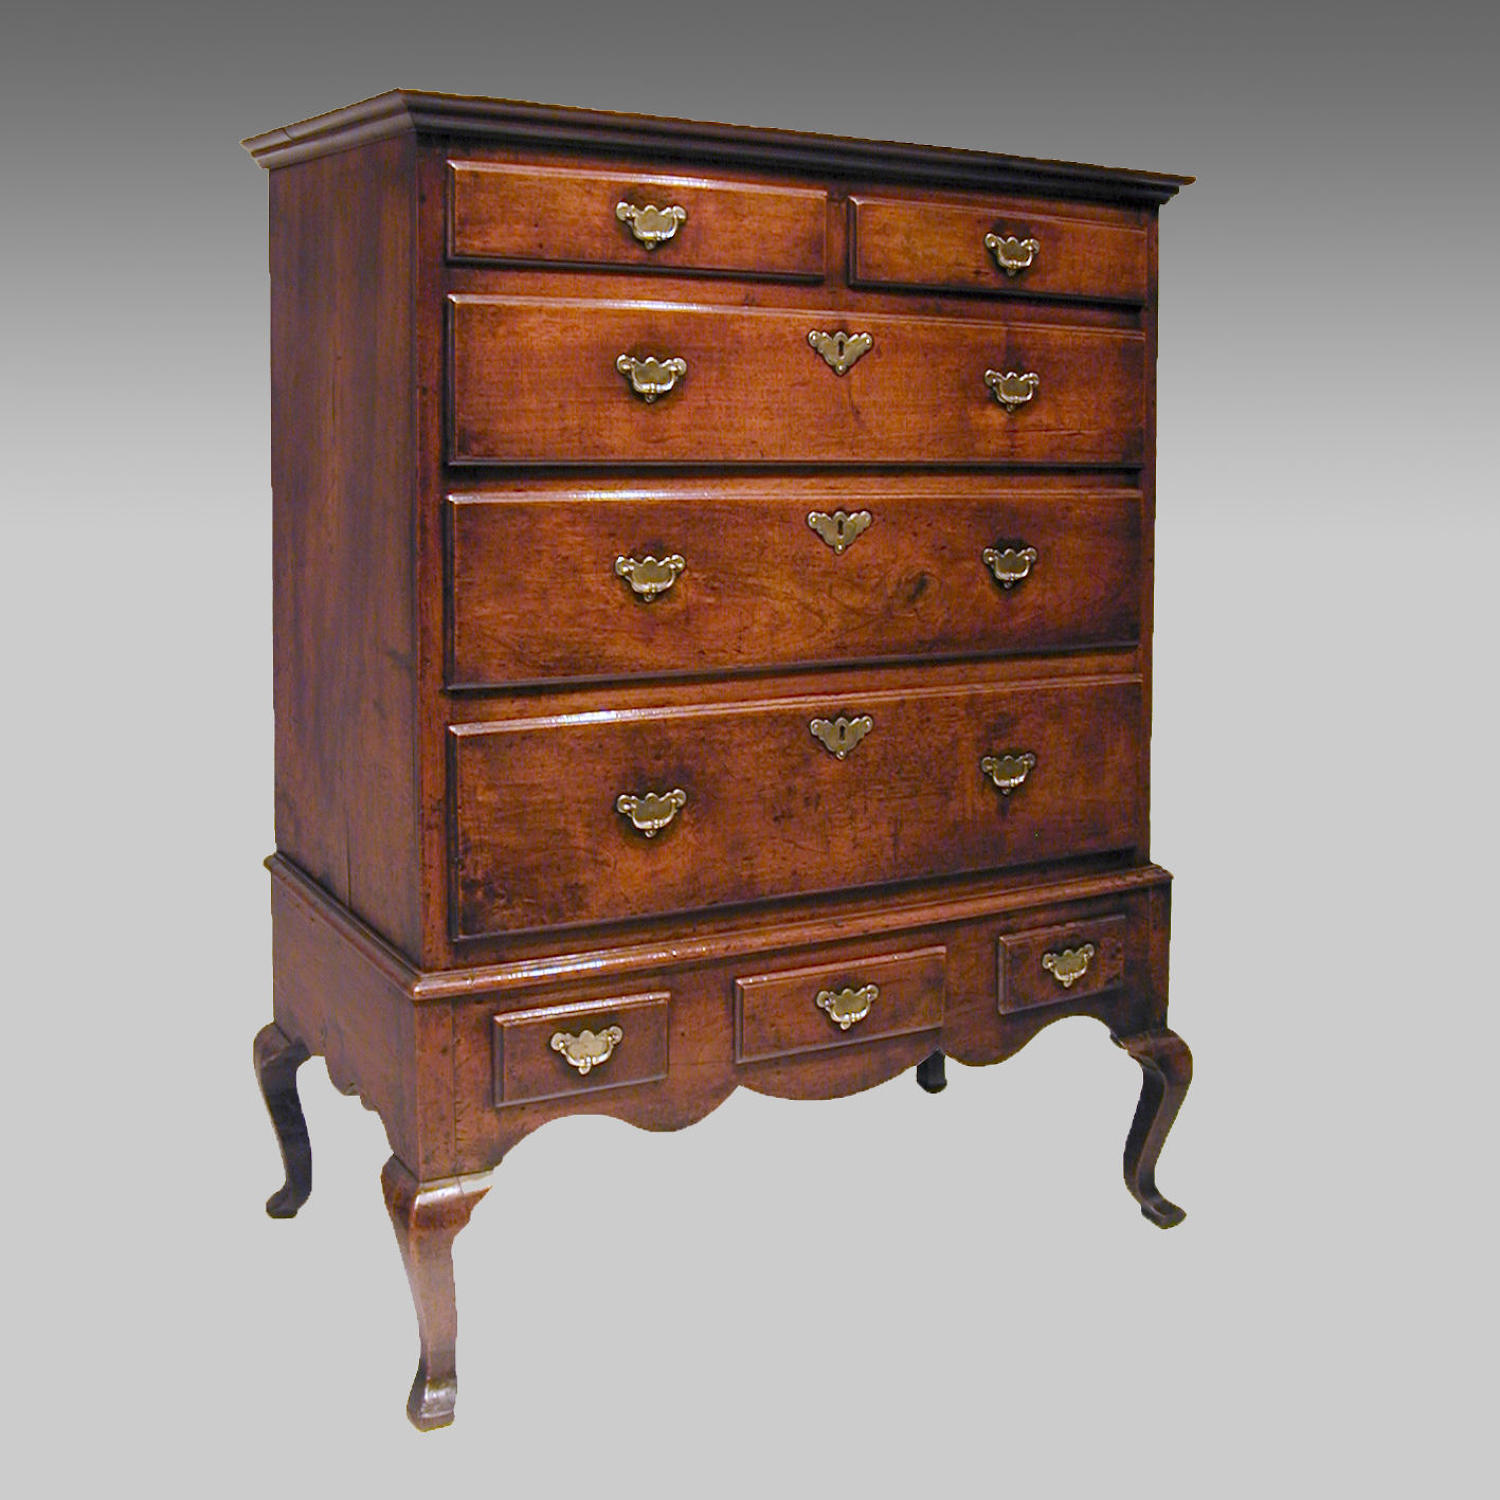 Early 18th century walnut chest on stand